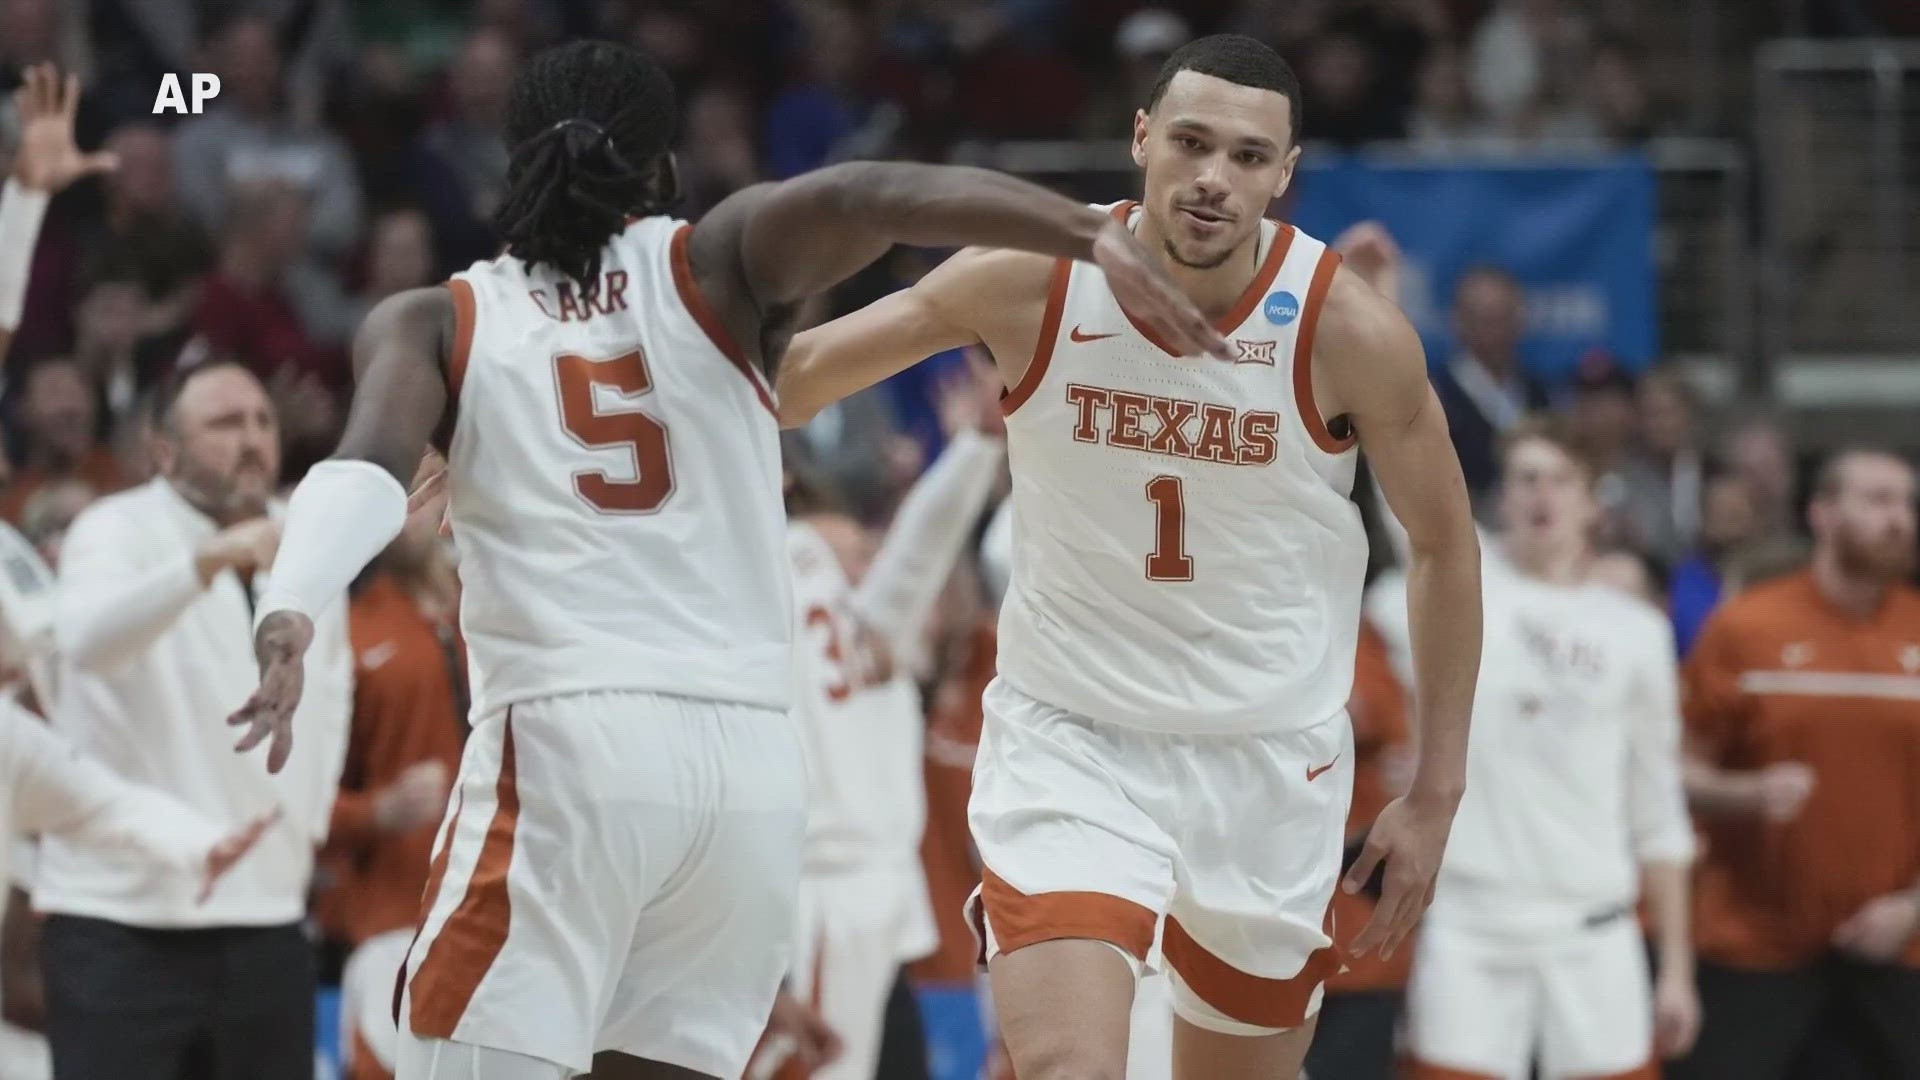 John Morris gives updates on the Big 12 teams still alive in college basketball's biggest tournament.